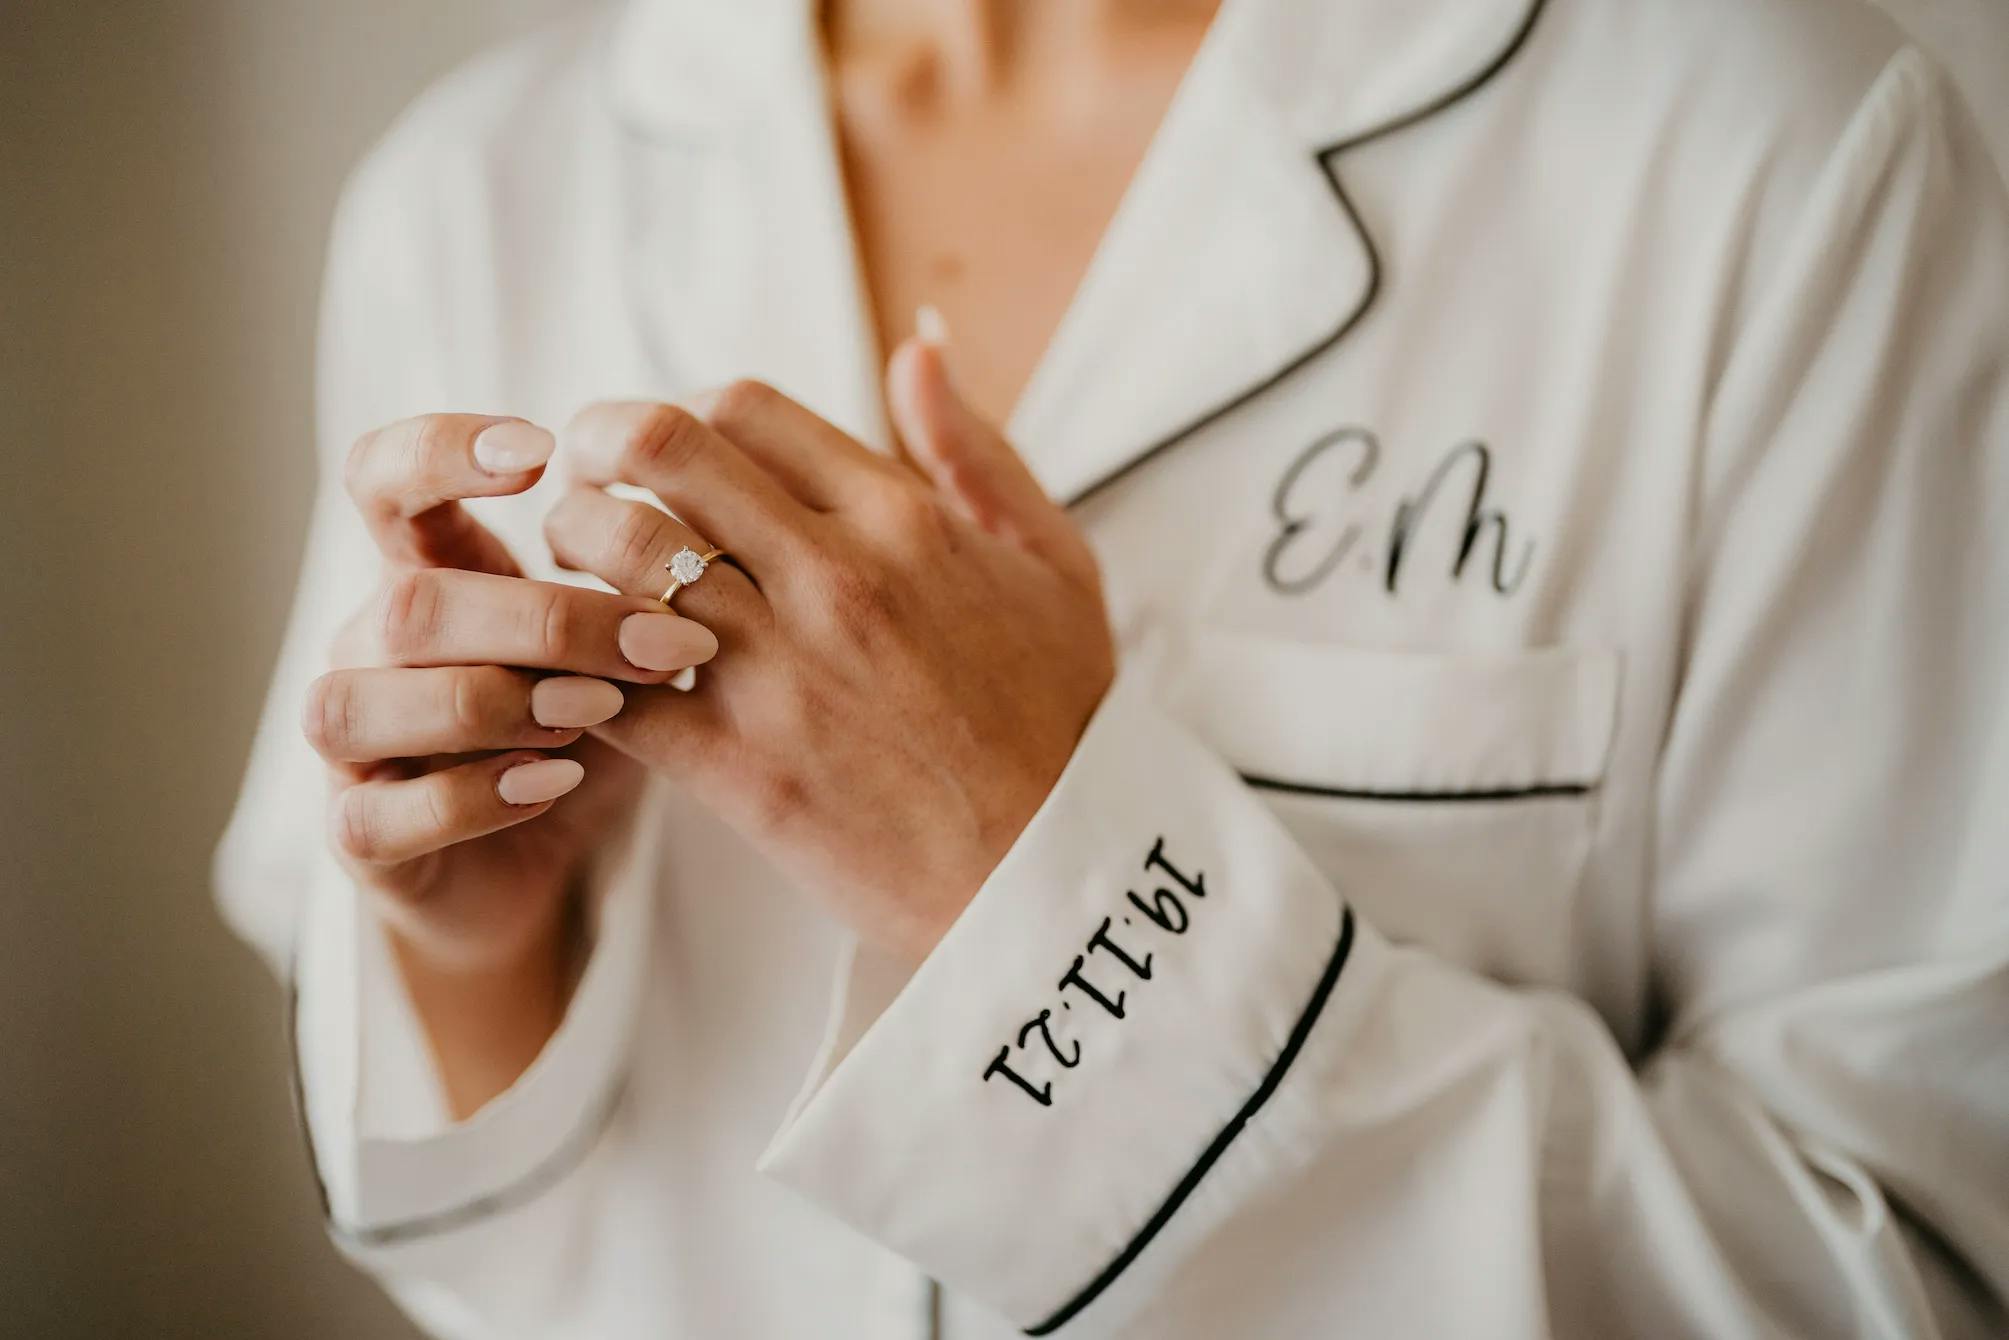 A person wearing a white pajama shirt with black piping, embroidered initials "EM," and the date "12-17-21" on the sleeve. They are displaying a sparkling engagement ring on their left hand and have neatly manicured nails.